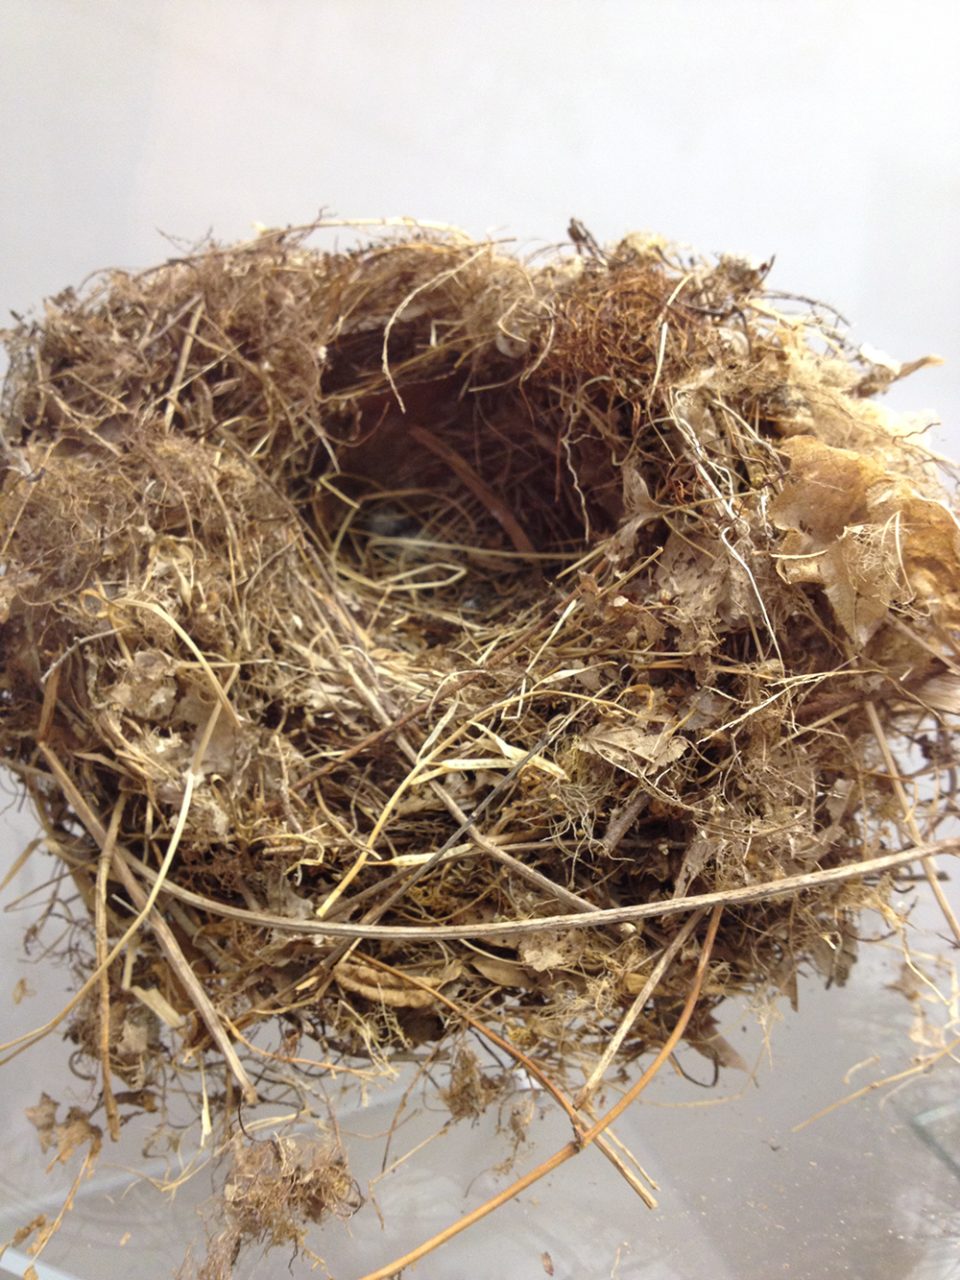 The visitor center at Dunbar Cave State Park was a bath house when the area was a tourist resort. Now it contains a free museum with artifacts from the cave and region, including a selection of bird nests like this one.